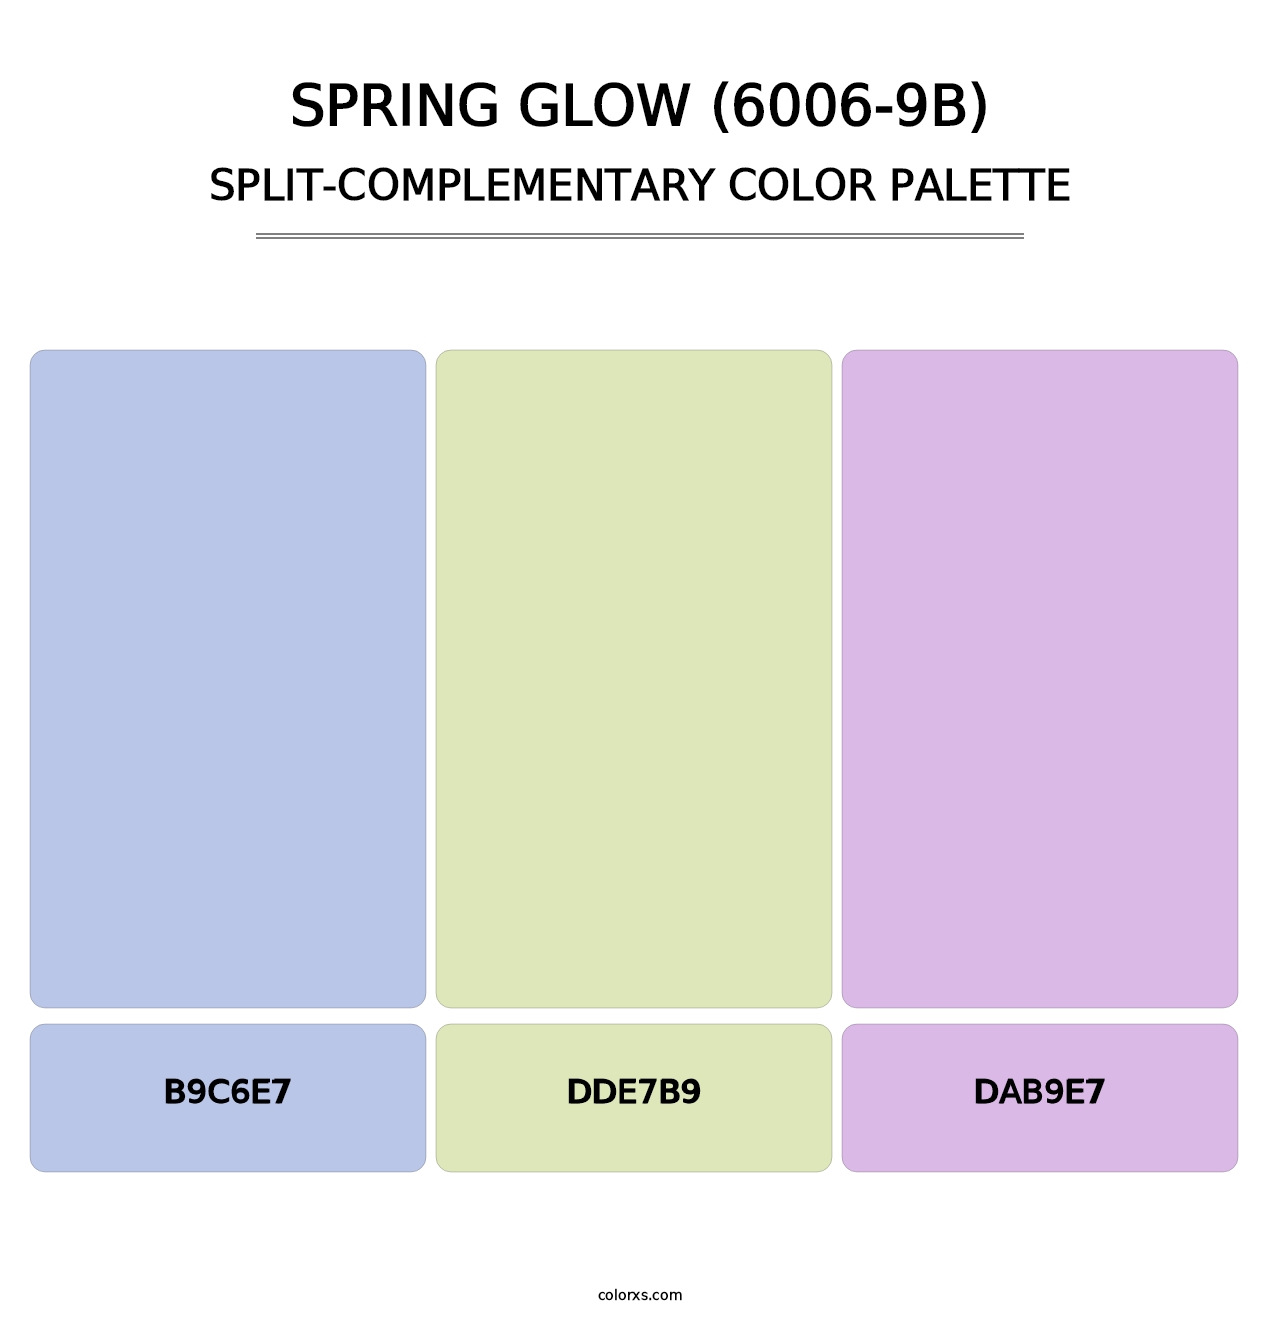 Spring Glow (6006-9B) - Split-Complementary Color Palette